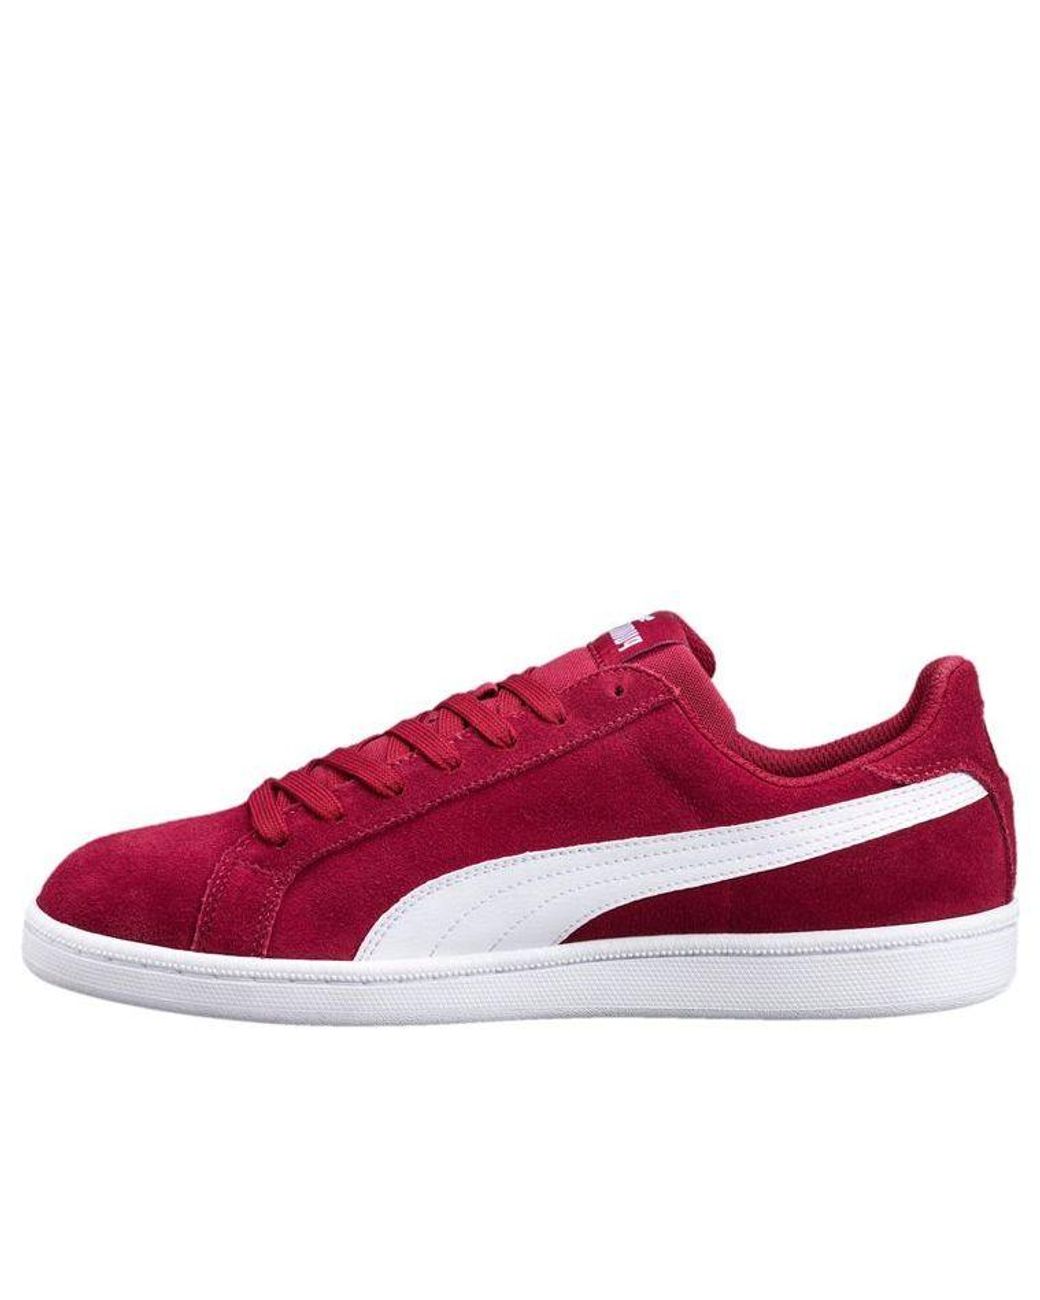 PUMA Smash Suede Retro Low Top Skate Shoes Red for Men | Lyst